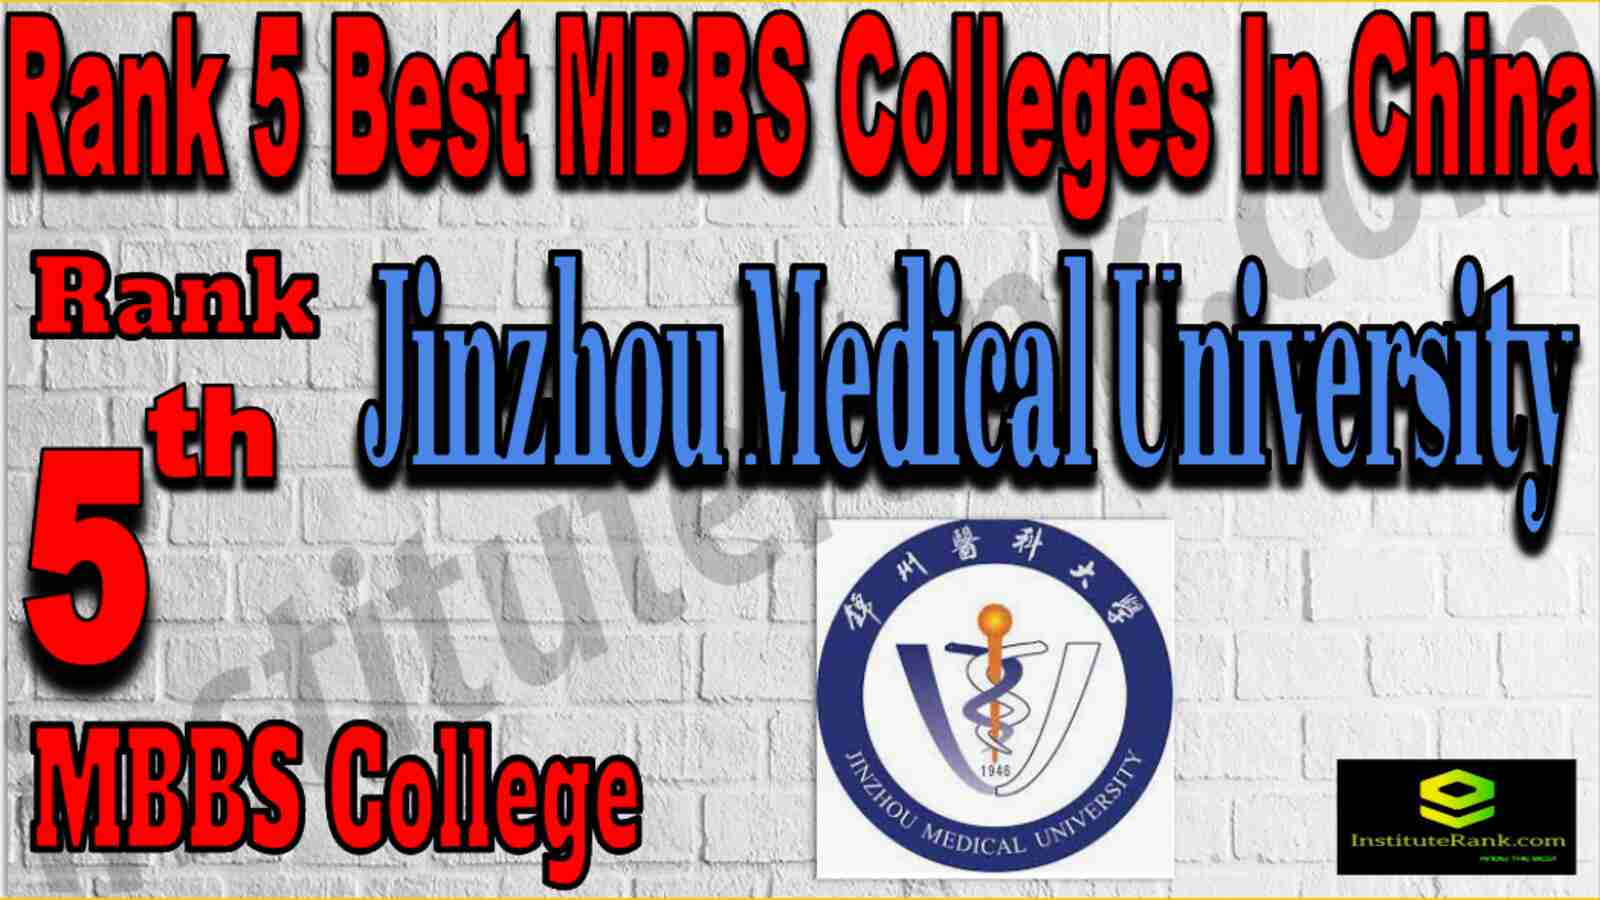 Rank 5 Best MBBS Colleges In China